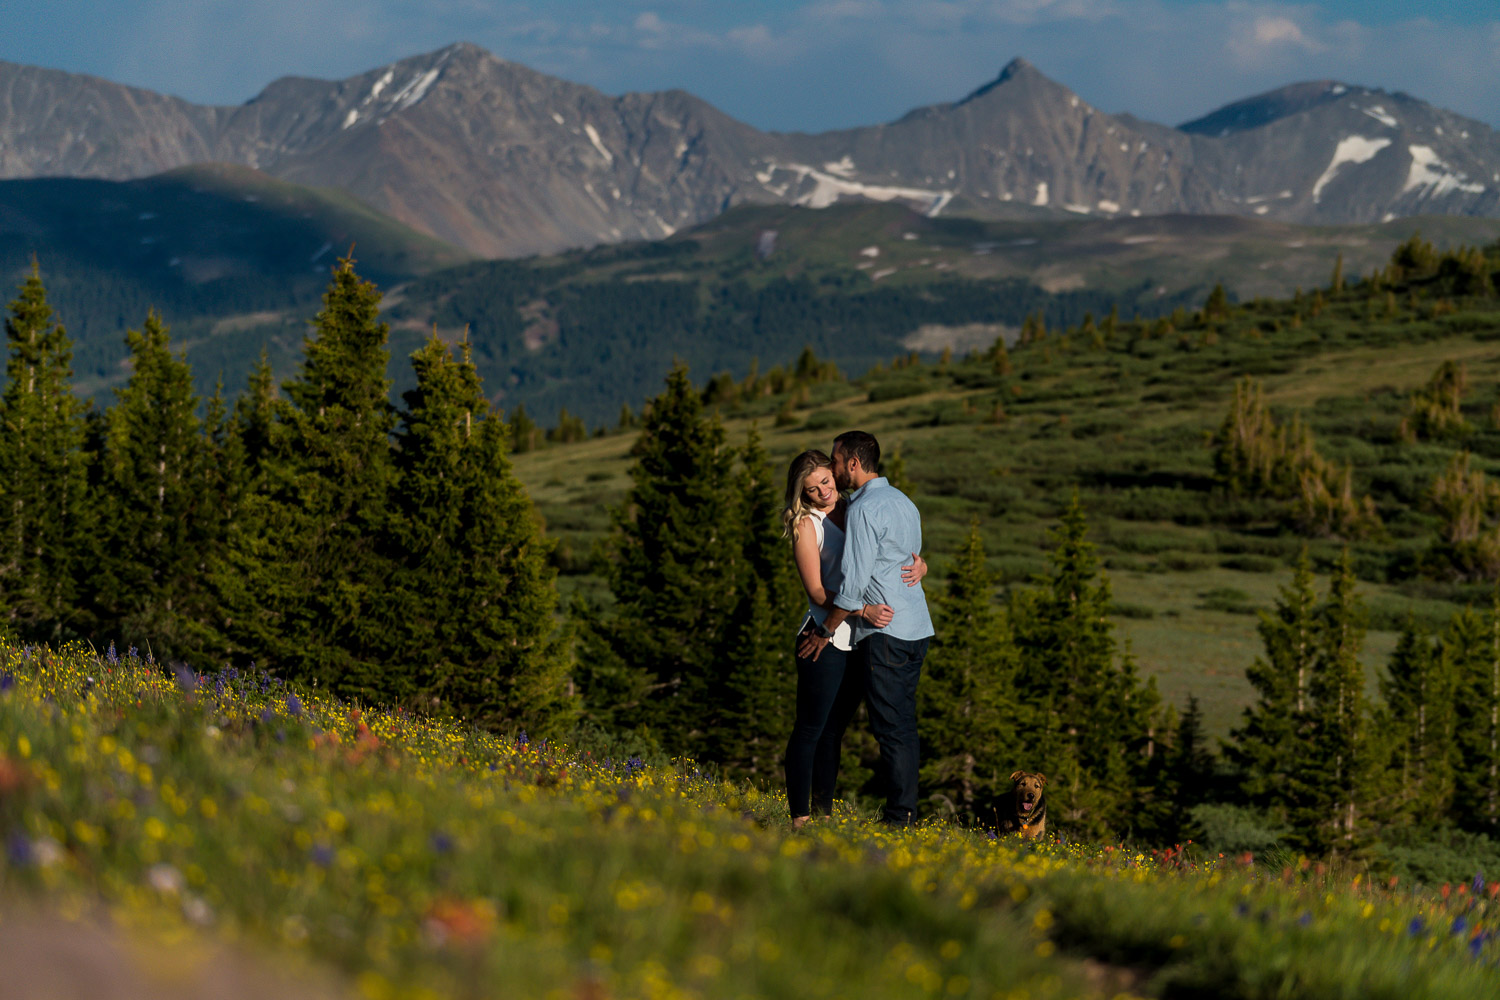 Vail Pass Engagement Photos with Wildflowers